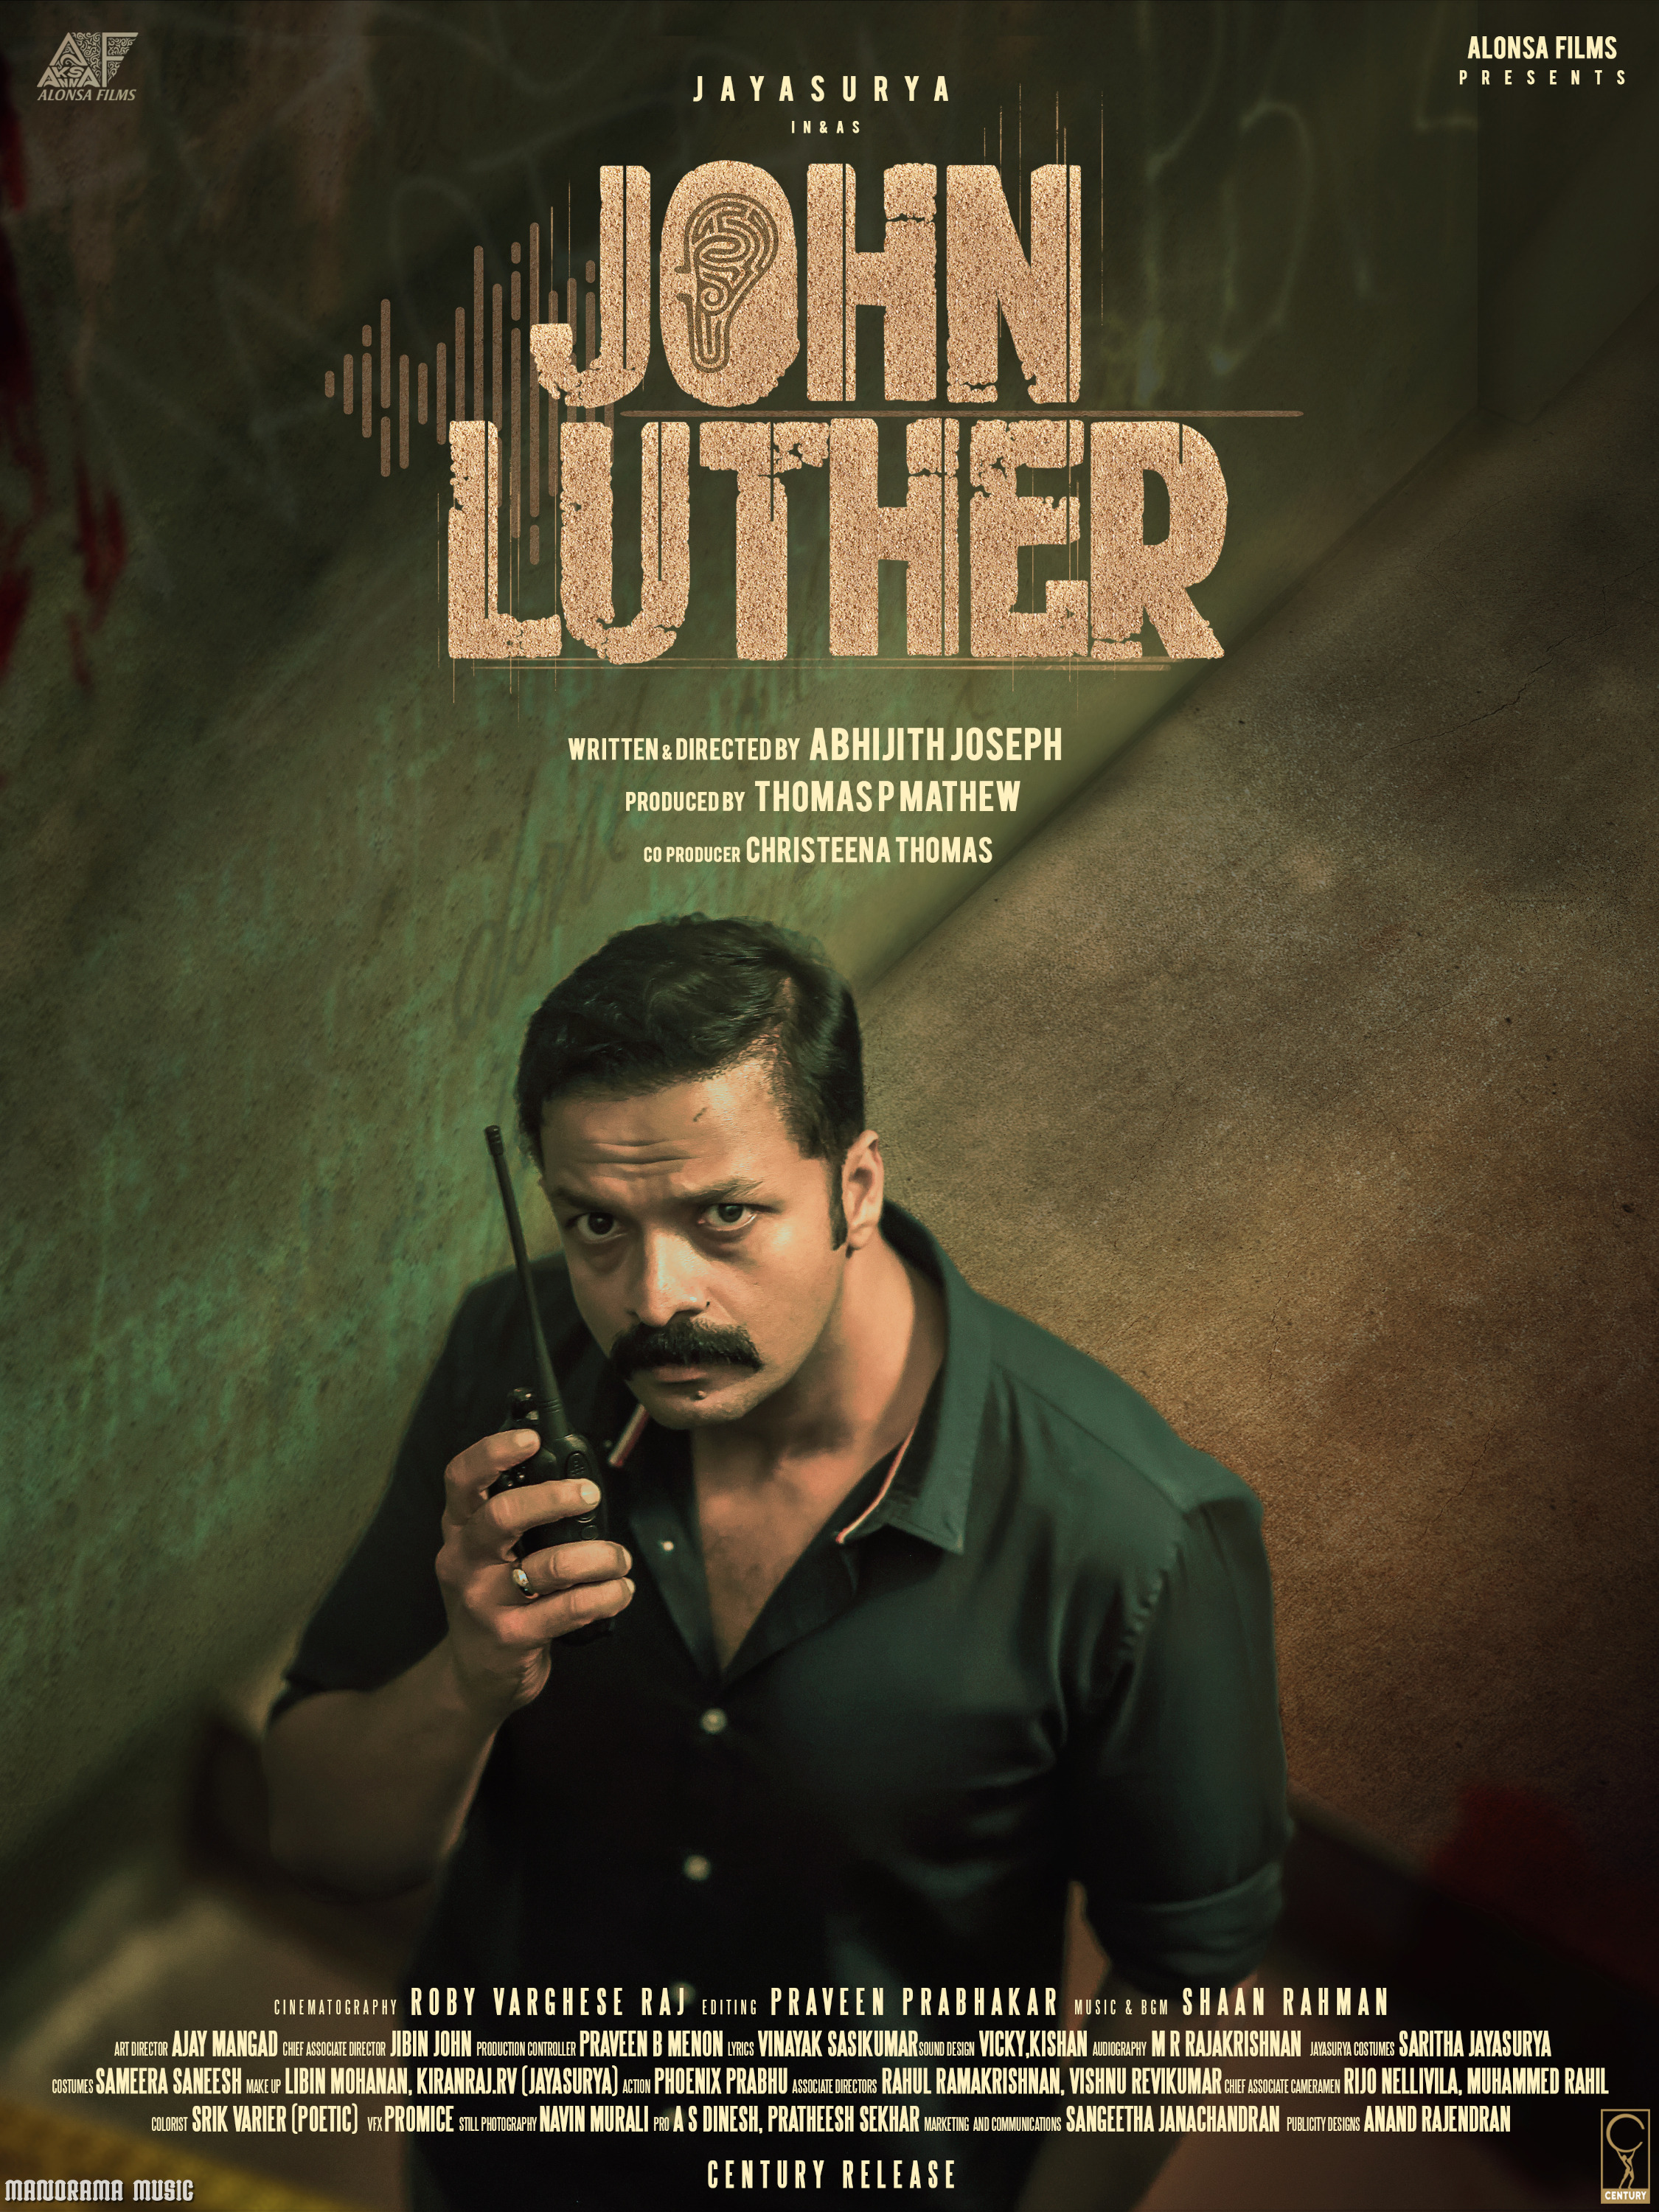 Mega Sized Movie Poster Image for John Luther (#7 of 7)